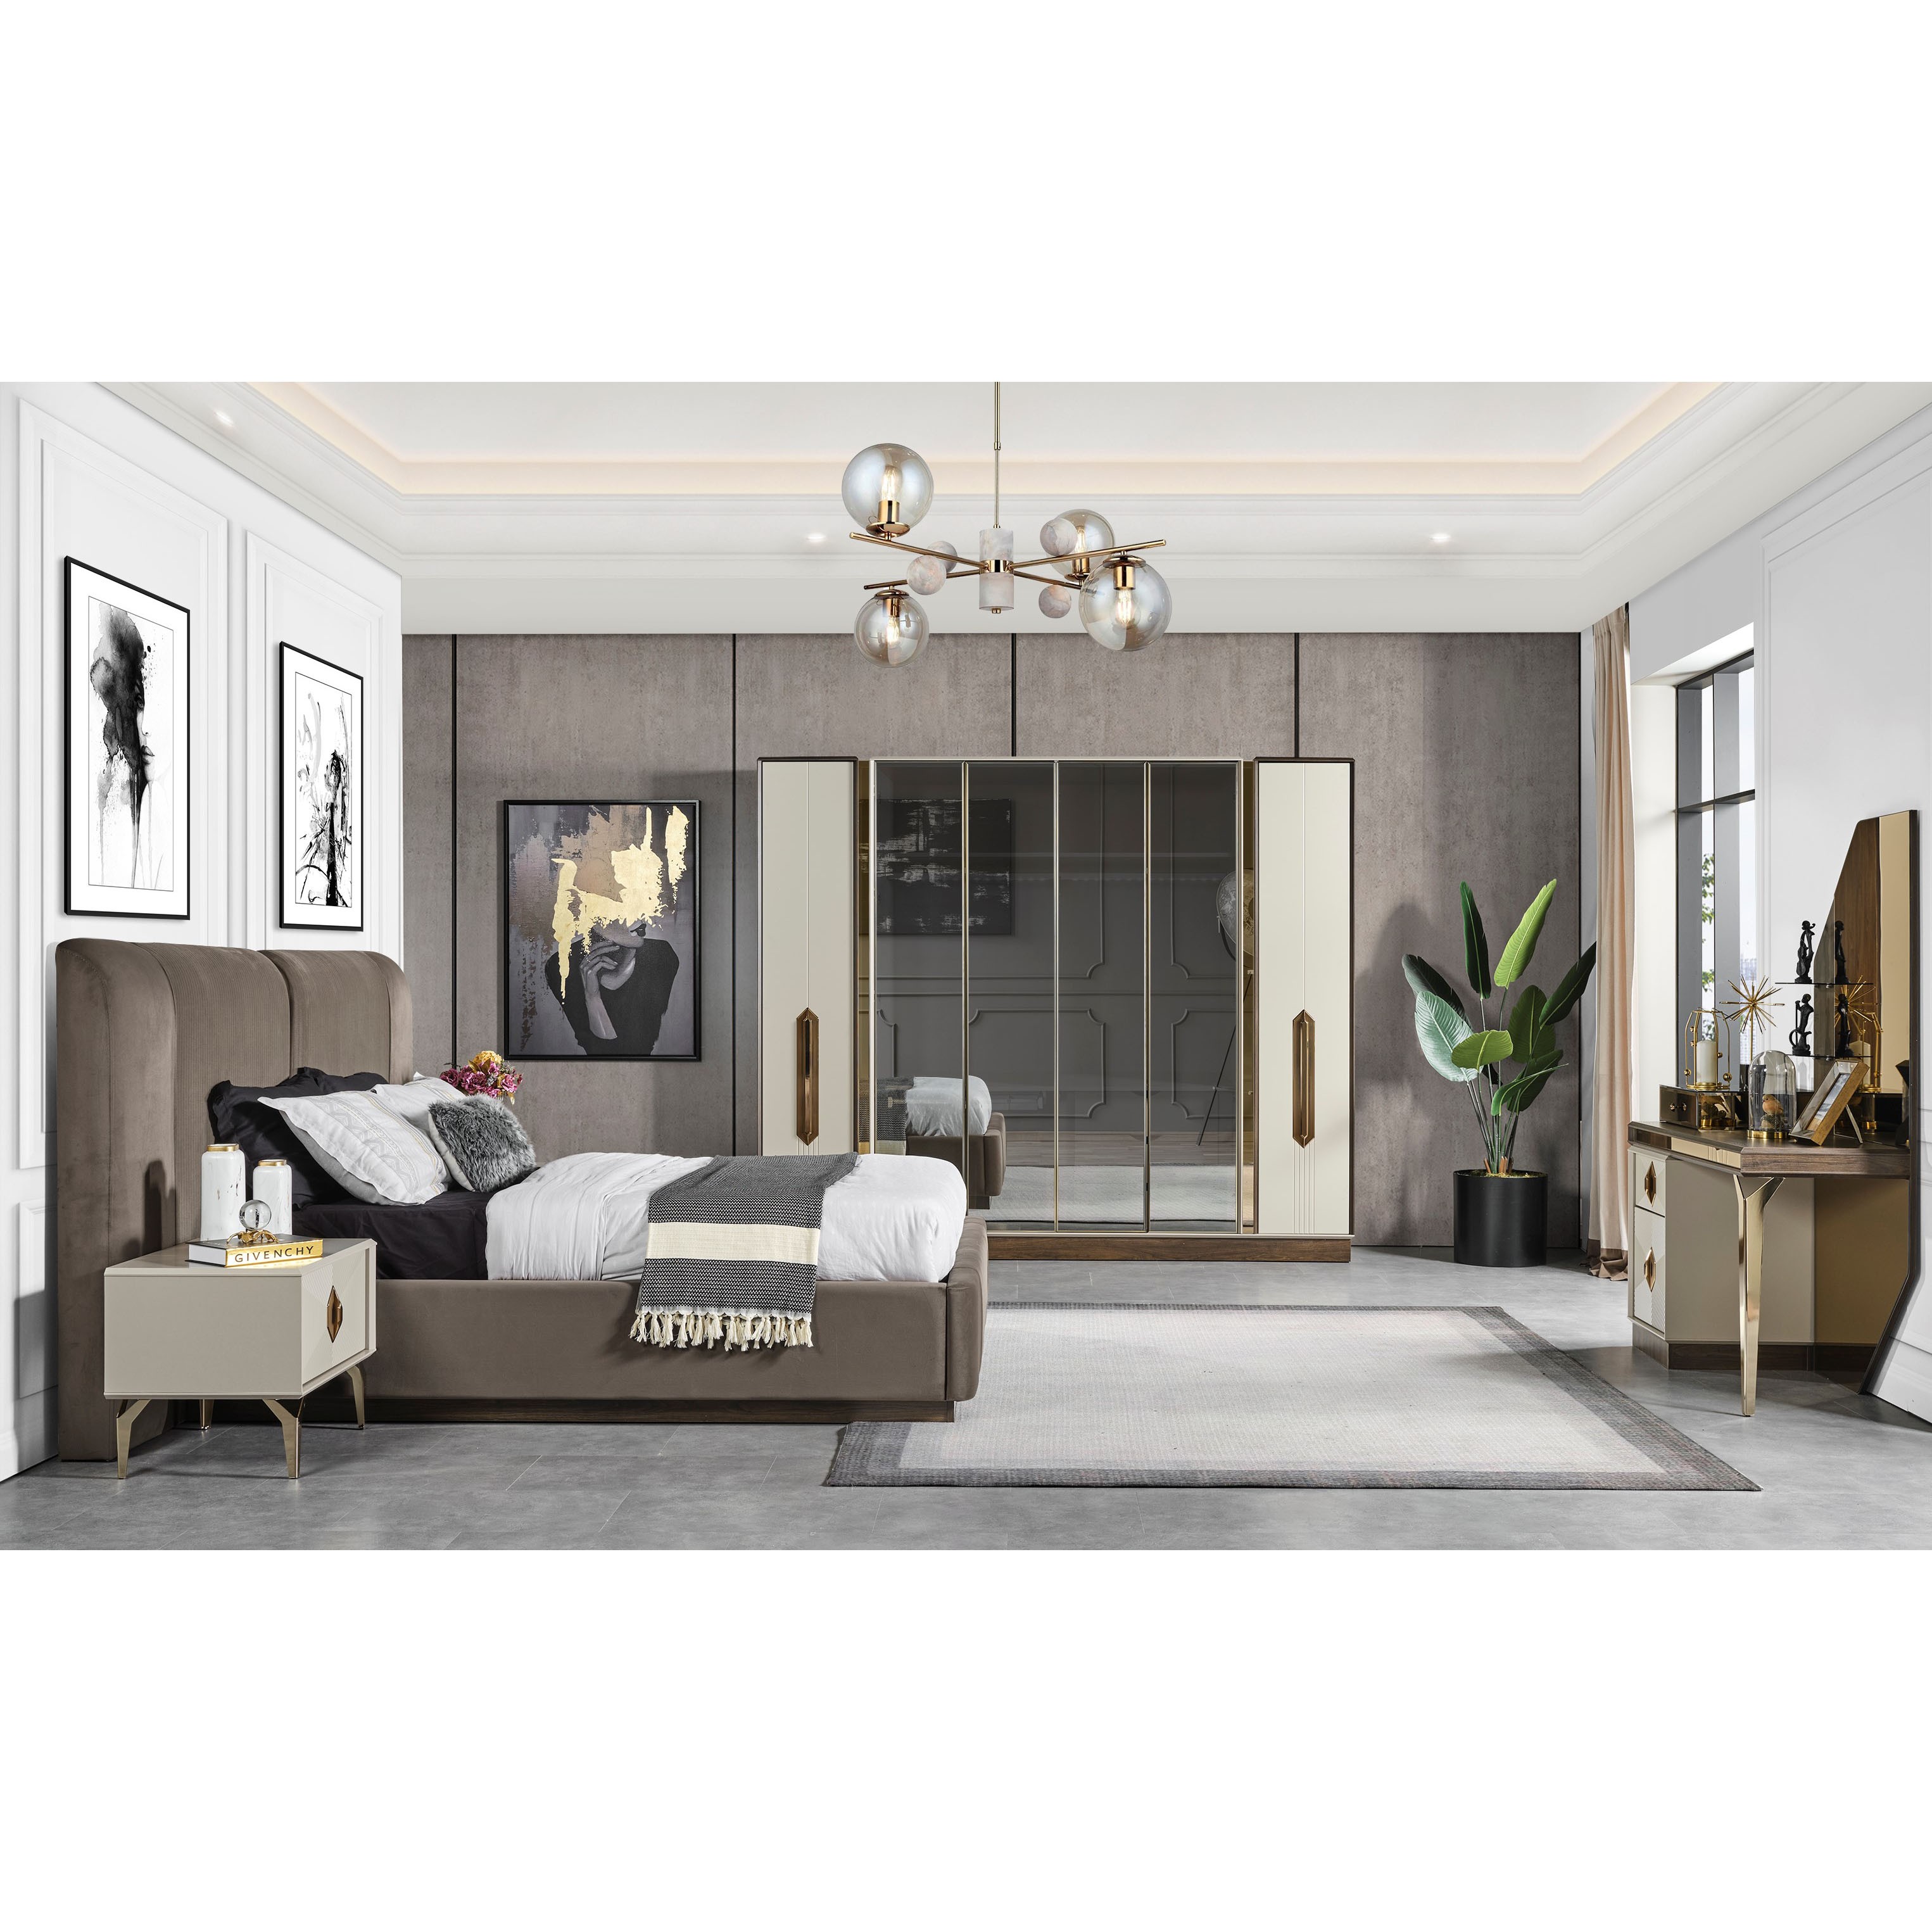 Trend Bedroom (Bed Without Storage 180x200 cm)